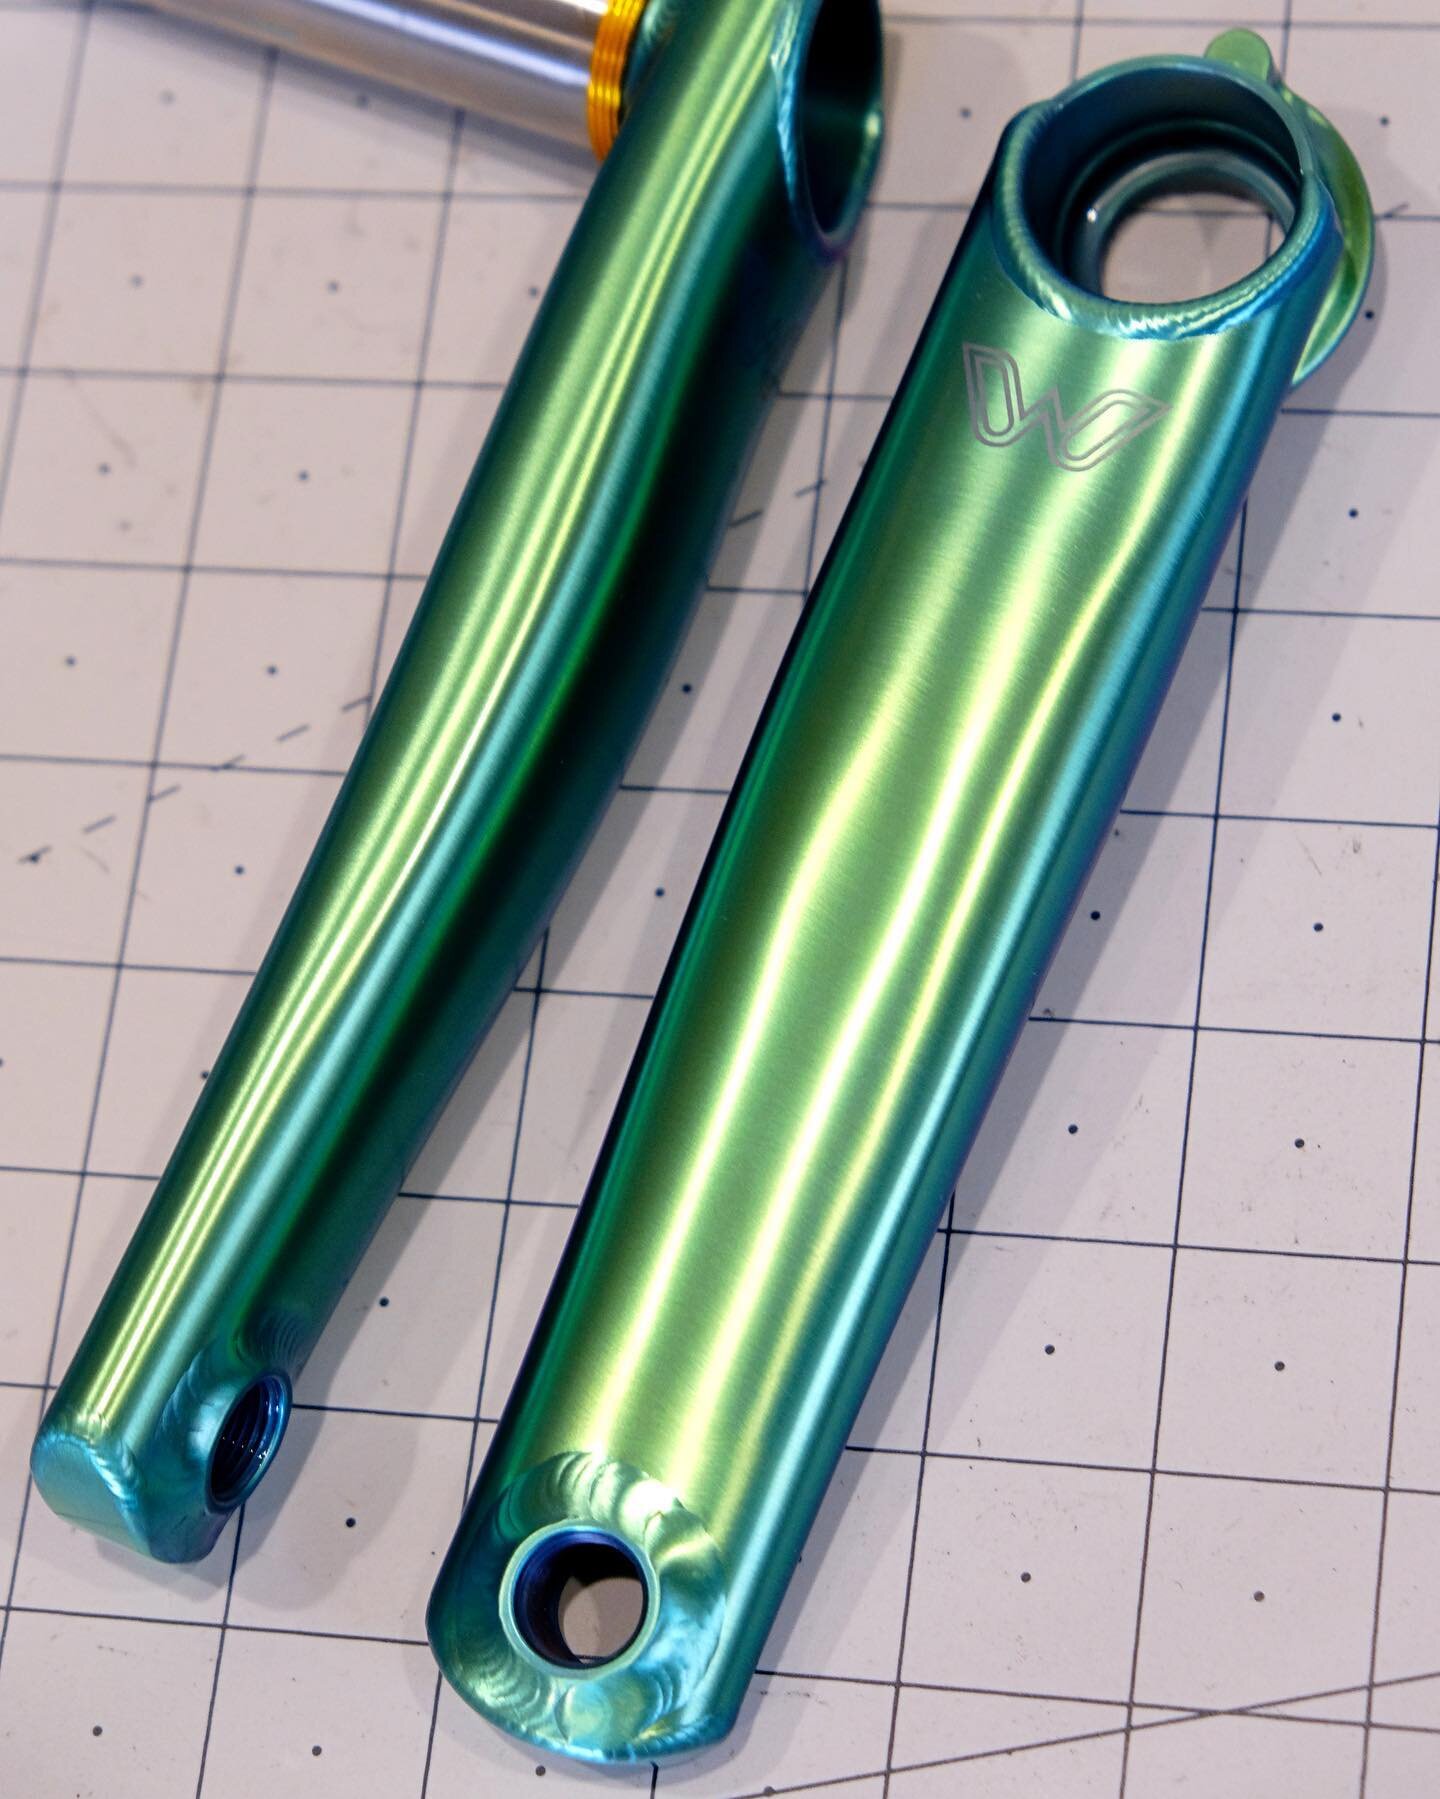 A sparkling set of emerald green eeWings that shipped off to Hong Kong recently. I swear, these things almost glowed.
.
.
.
#titaniumanodizing #tibike #cycling #durango #colorado #eewings #titanium #anodizing #custombicycle